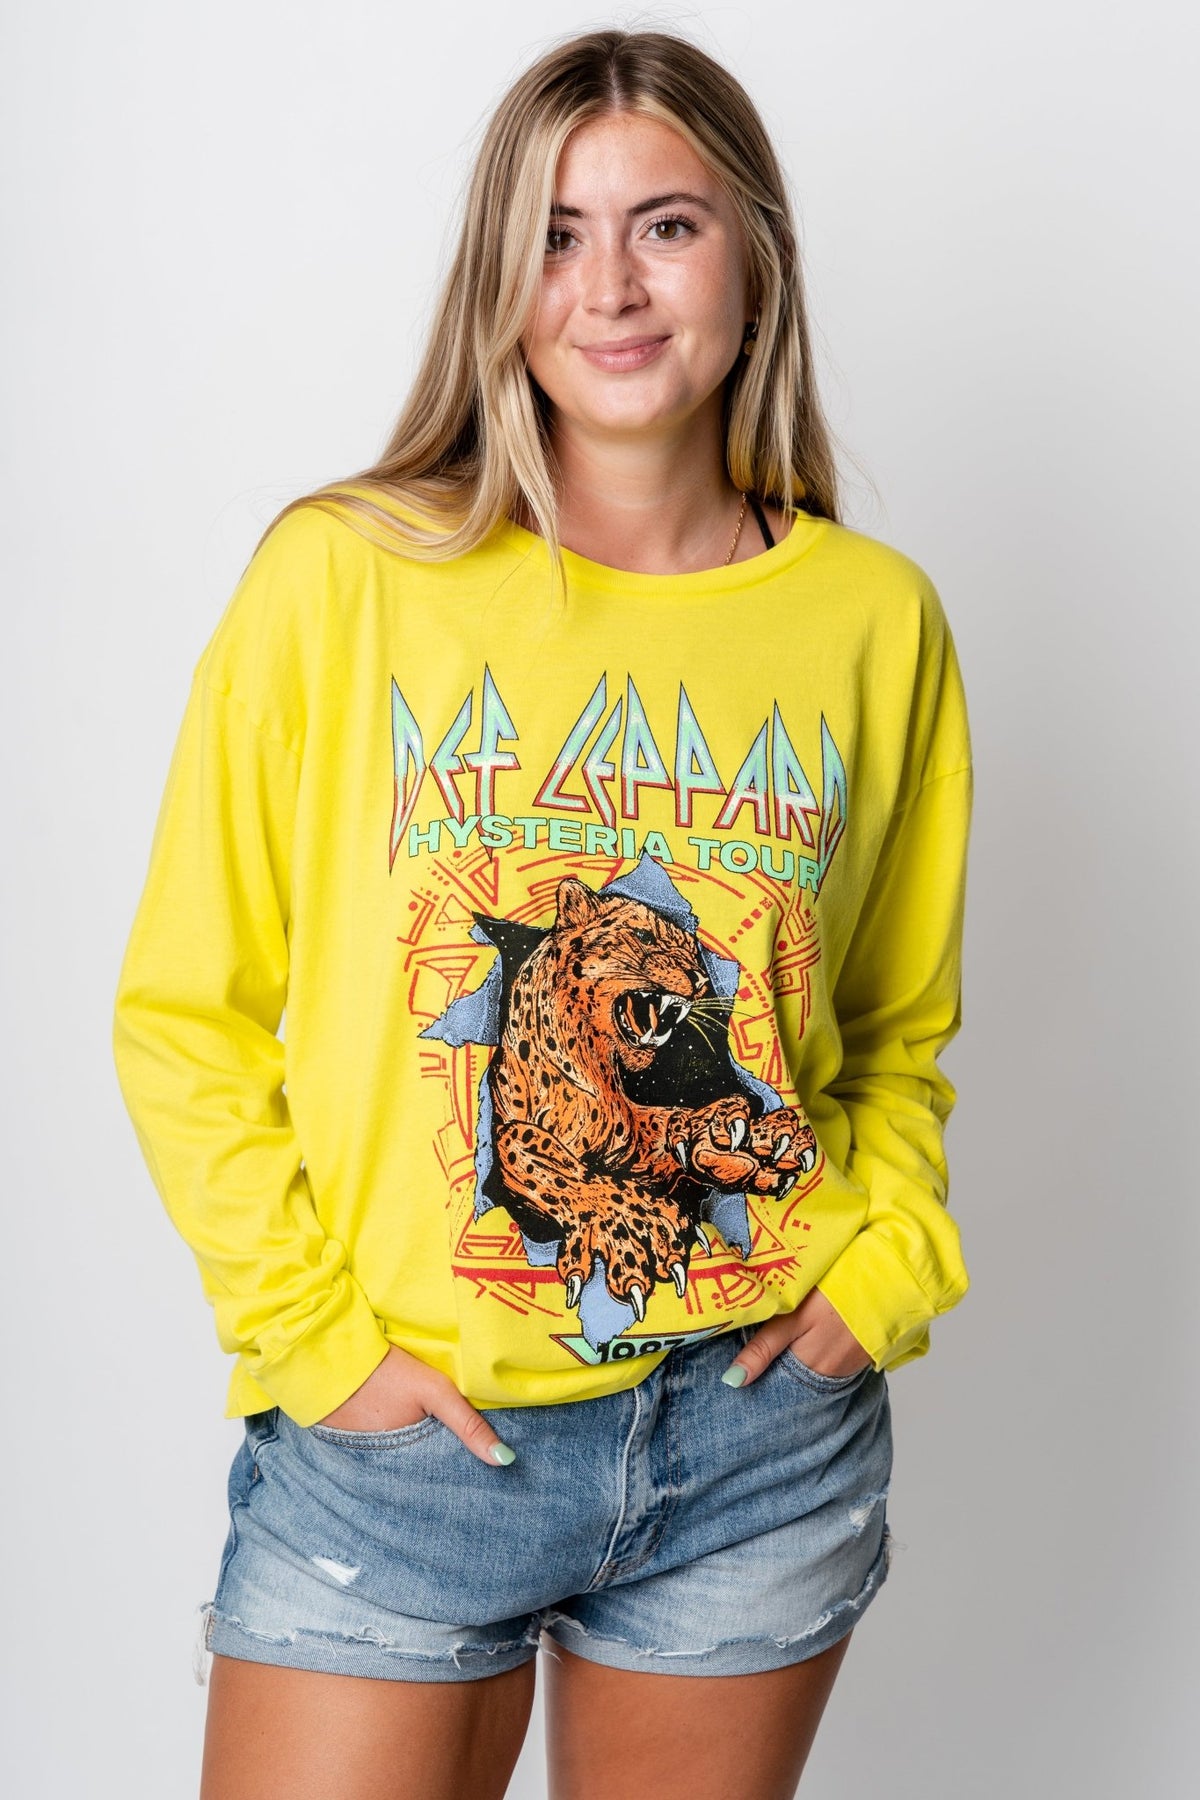 DayDreamer Def Leppard hysteria tour long sleeve tee lemon tonic - DayDreamer Graphic Band Tees at Lush Fashion Lounge Trendy Boutique in Oklahoma City